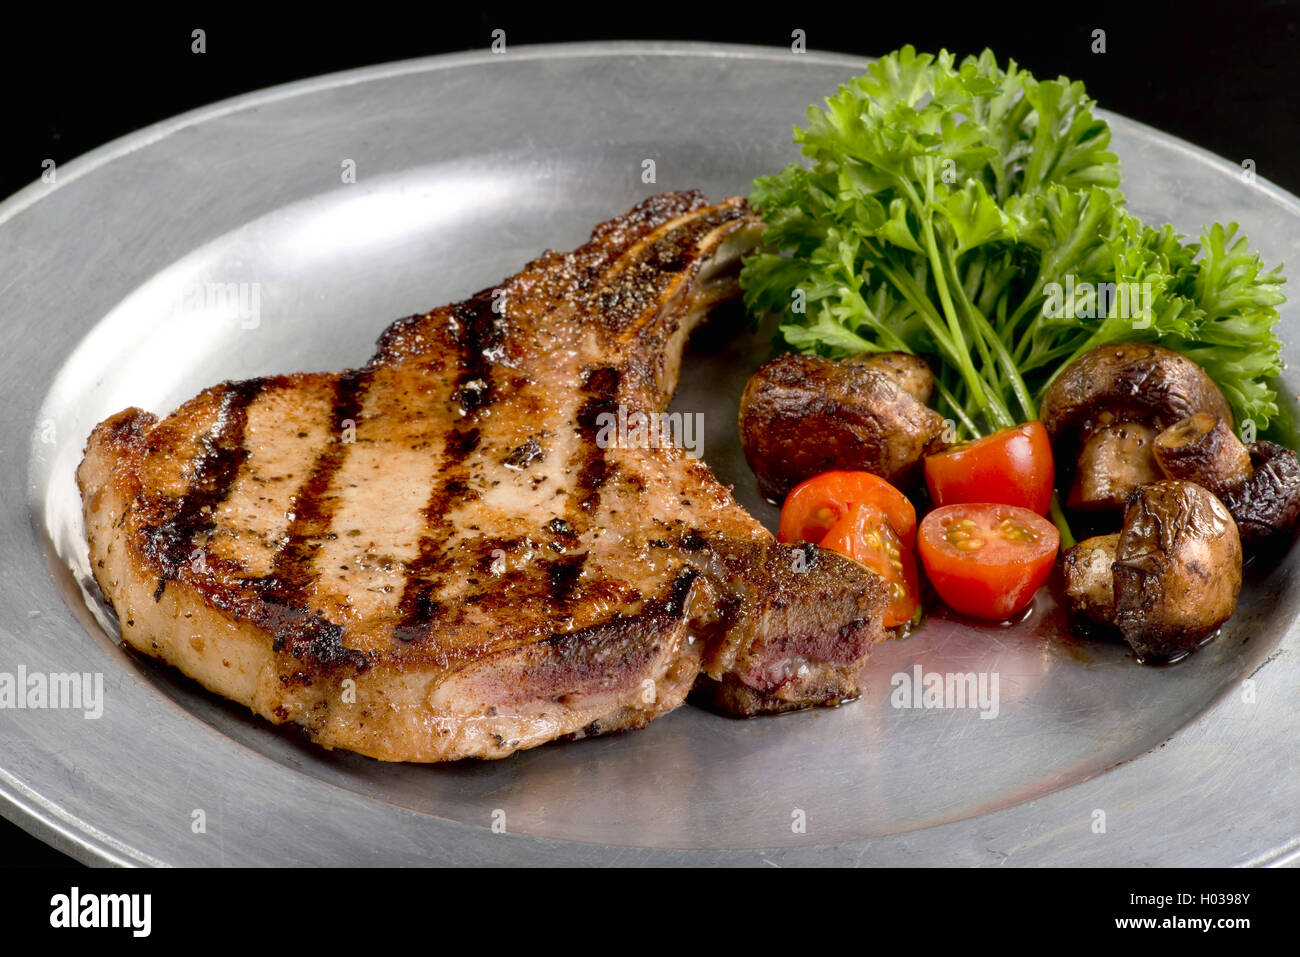 Grilled fresh pork chop with mushrooms and cherry tomatoes. Stock Photo